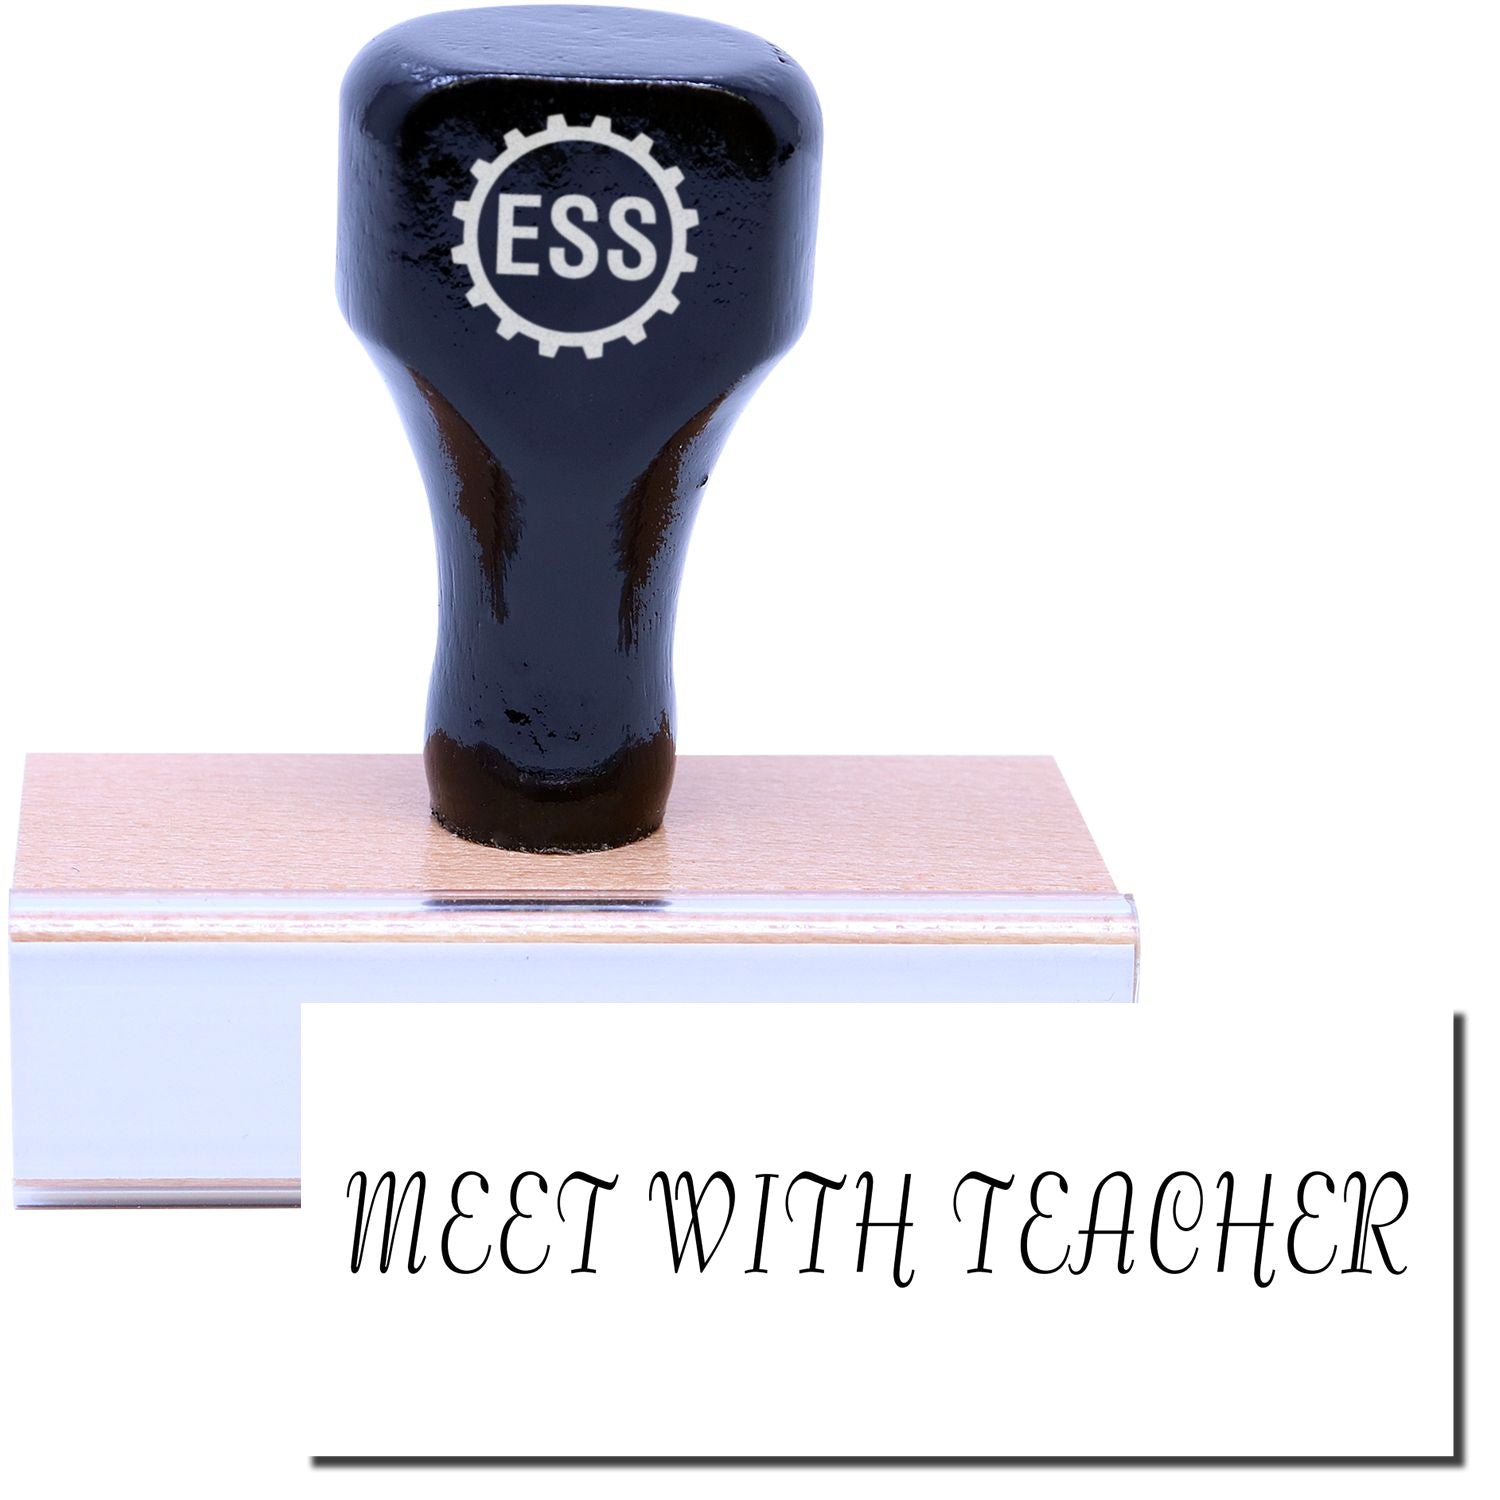 A stock office rubber stamp with a stamped image showing how the text "MEET WITH TEACHER" in a large font is displayed after stamping.